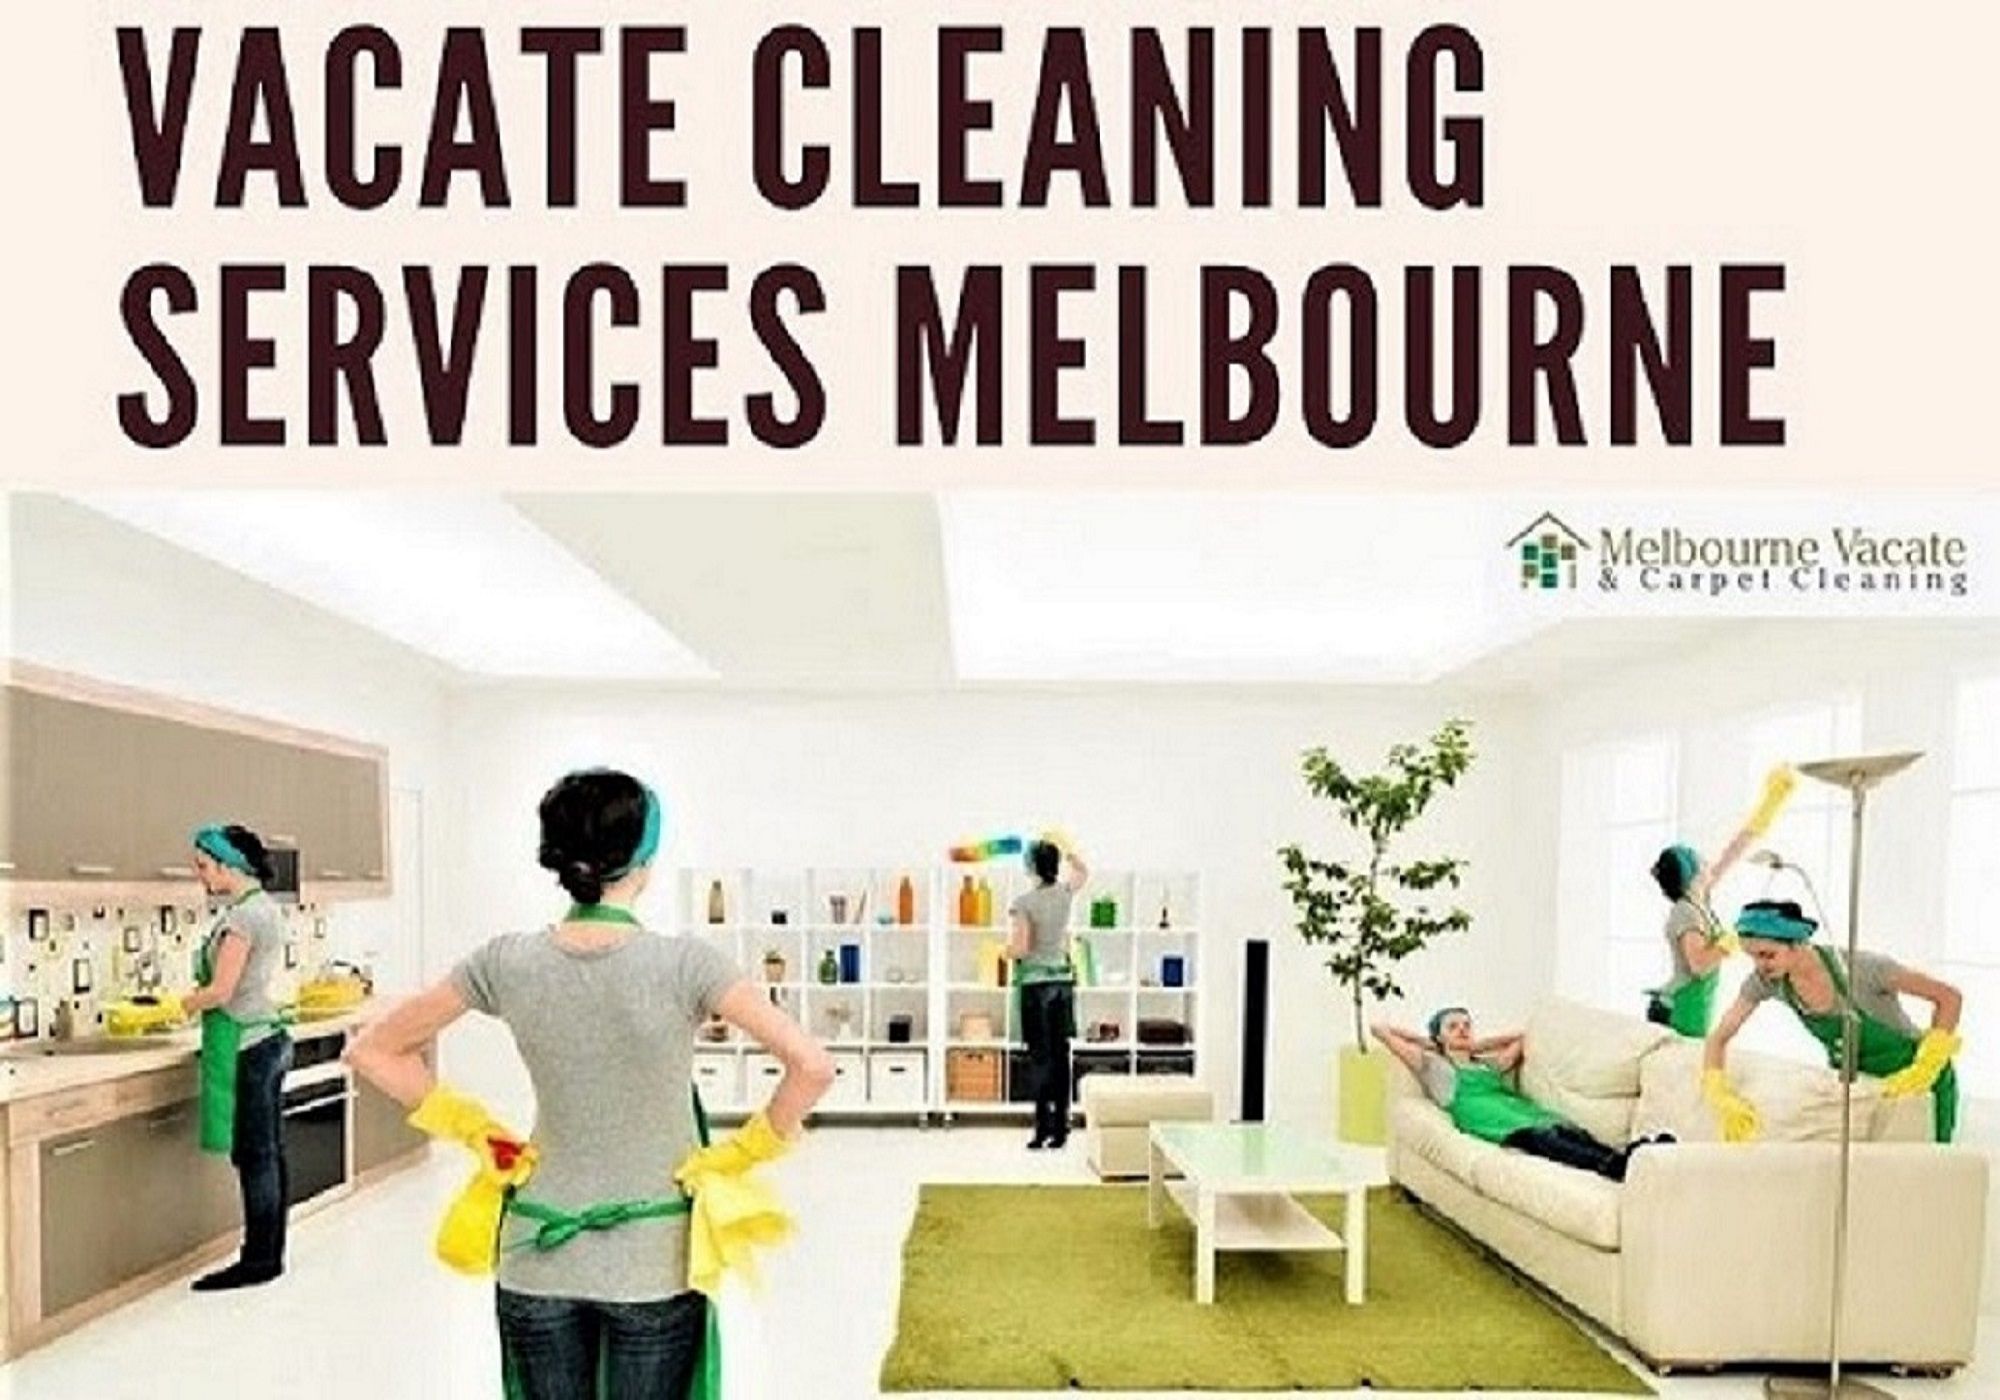 Melbourne Vacate and Carpet Cleaning Cover